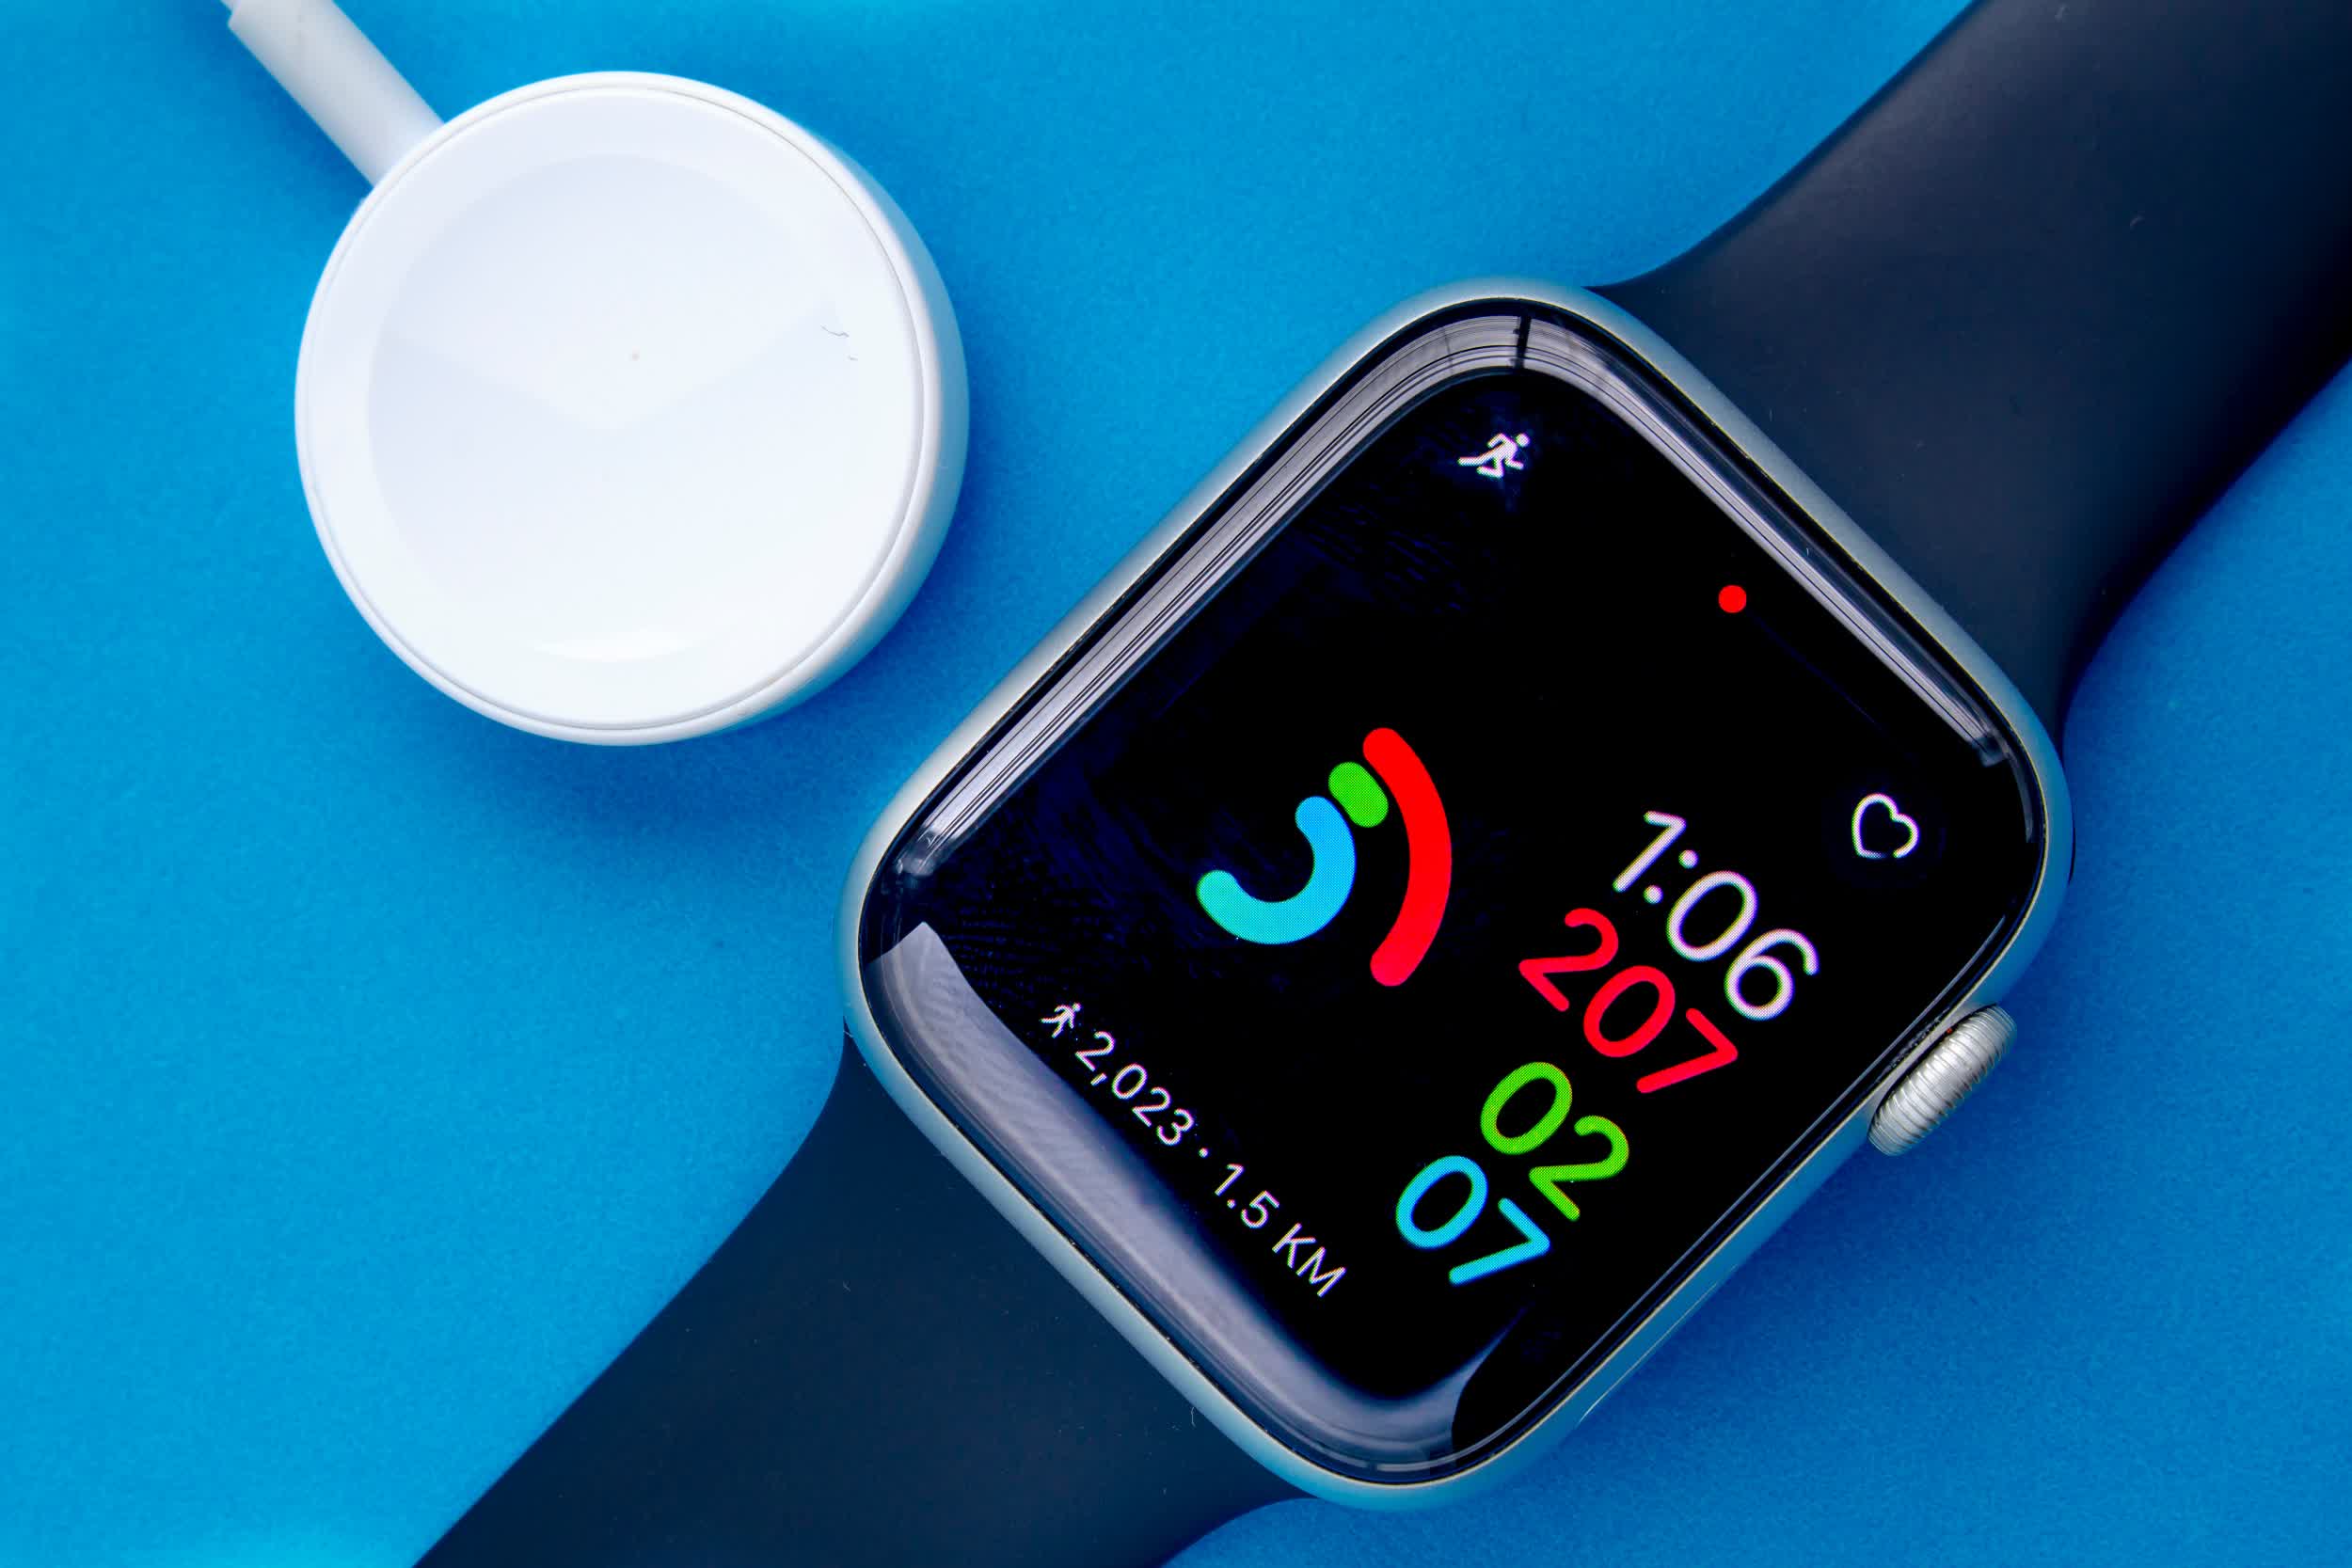 Smartwatch shipments stalled in 2020 due to the pandemic, but there were a few bright spots